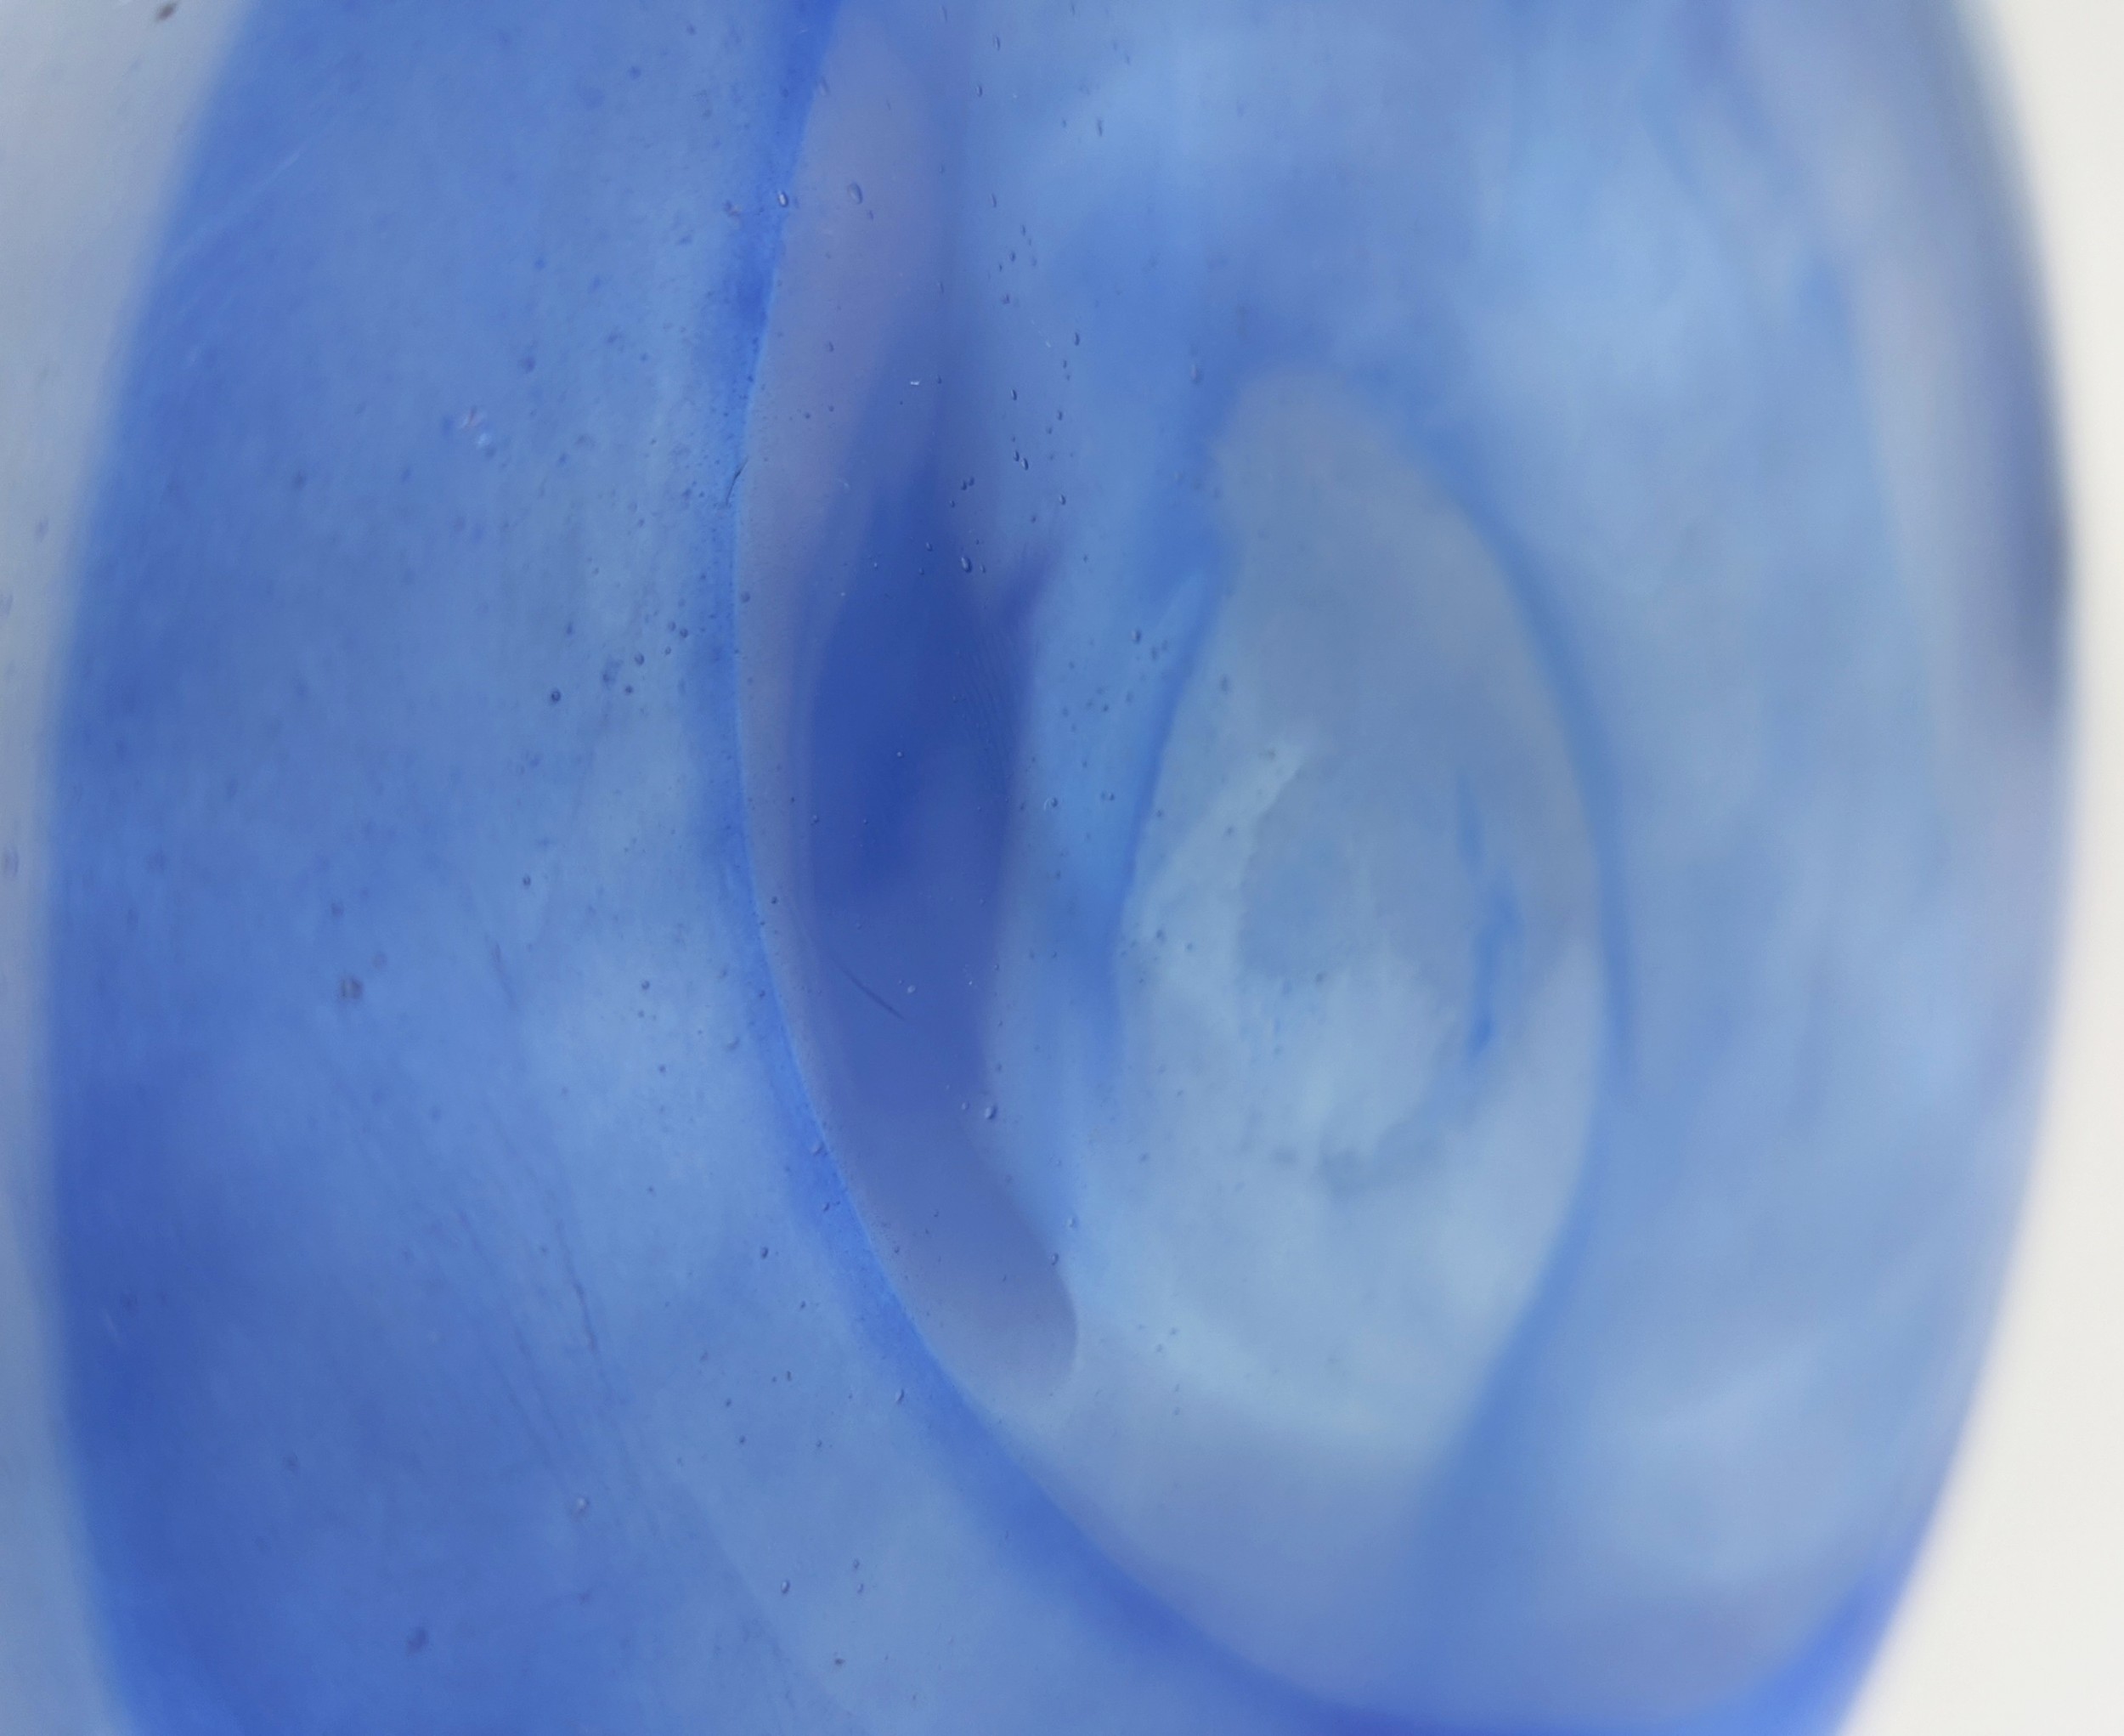 A MURANO TALL BLUE GLASS VASE, of baluster form with an elongated neck, with varying shades of - Image 5 of 5